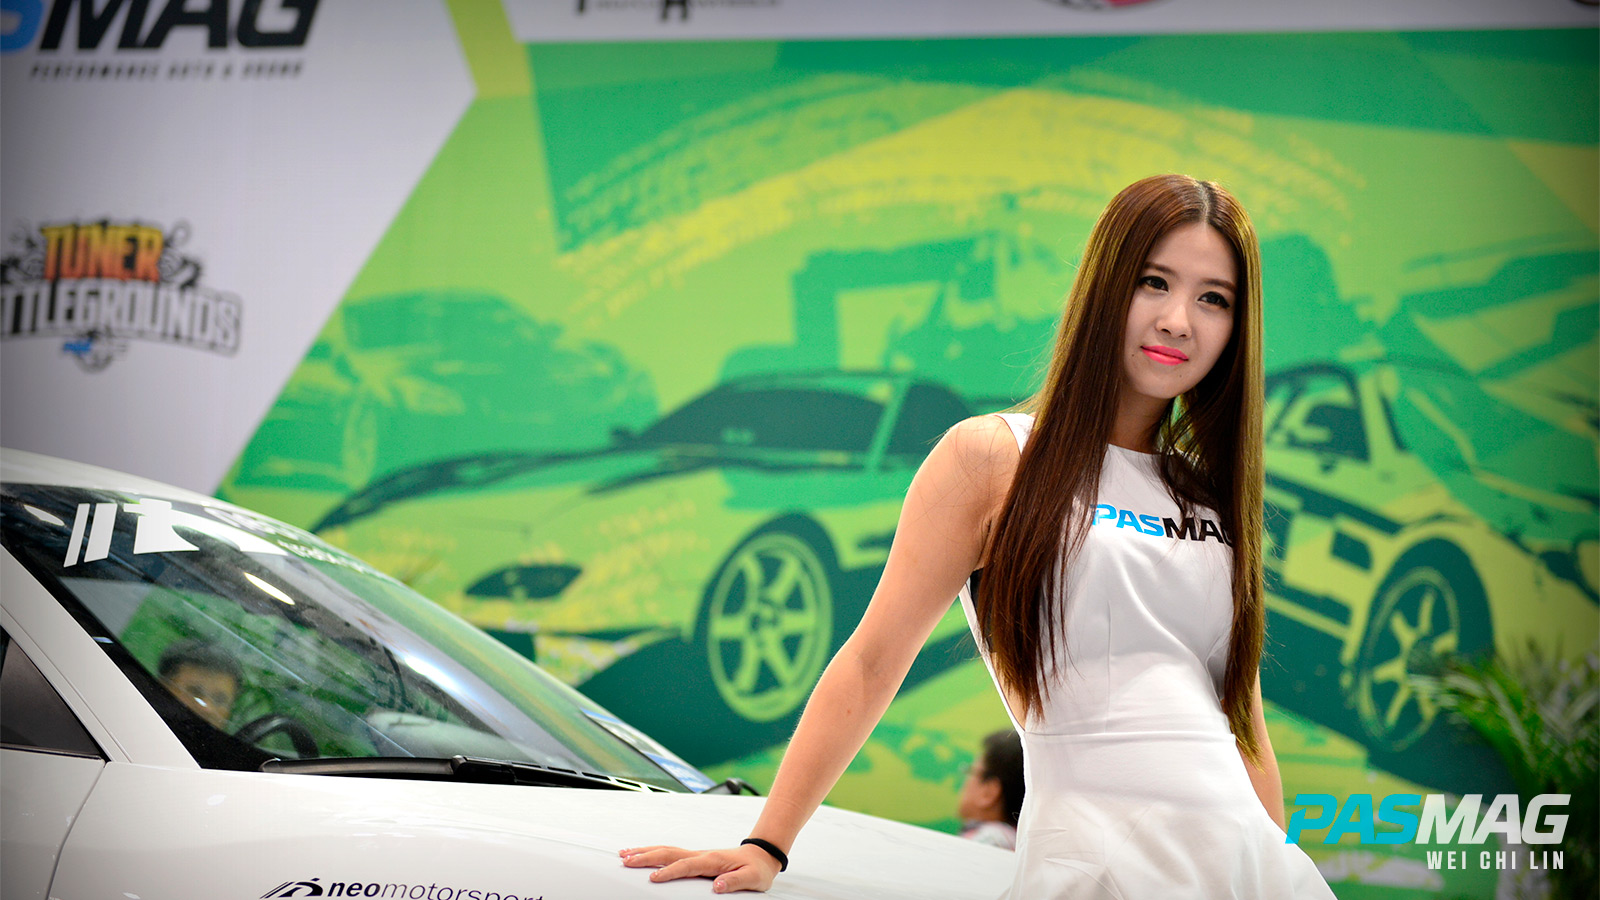 A Promising Prospect: China's All in Tuning show